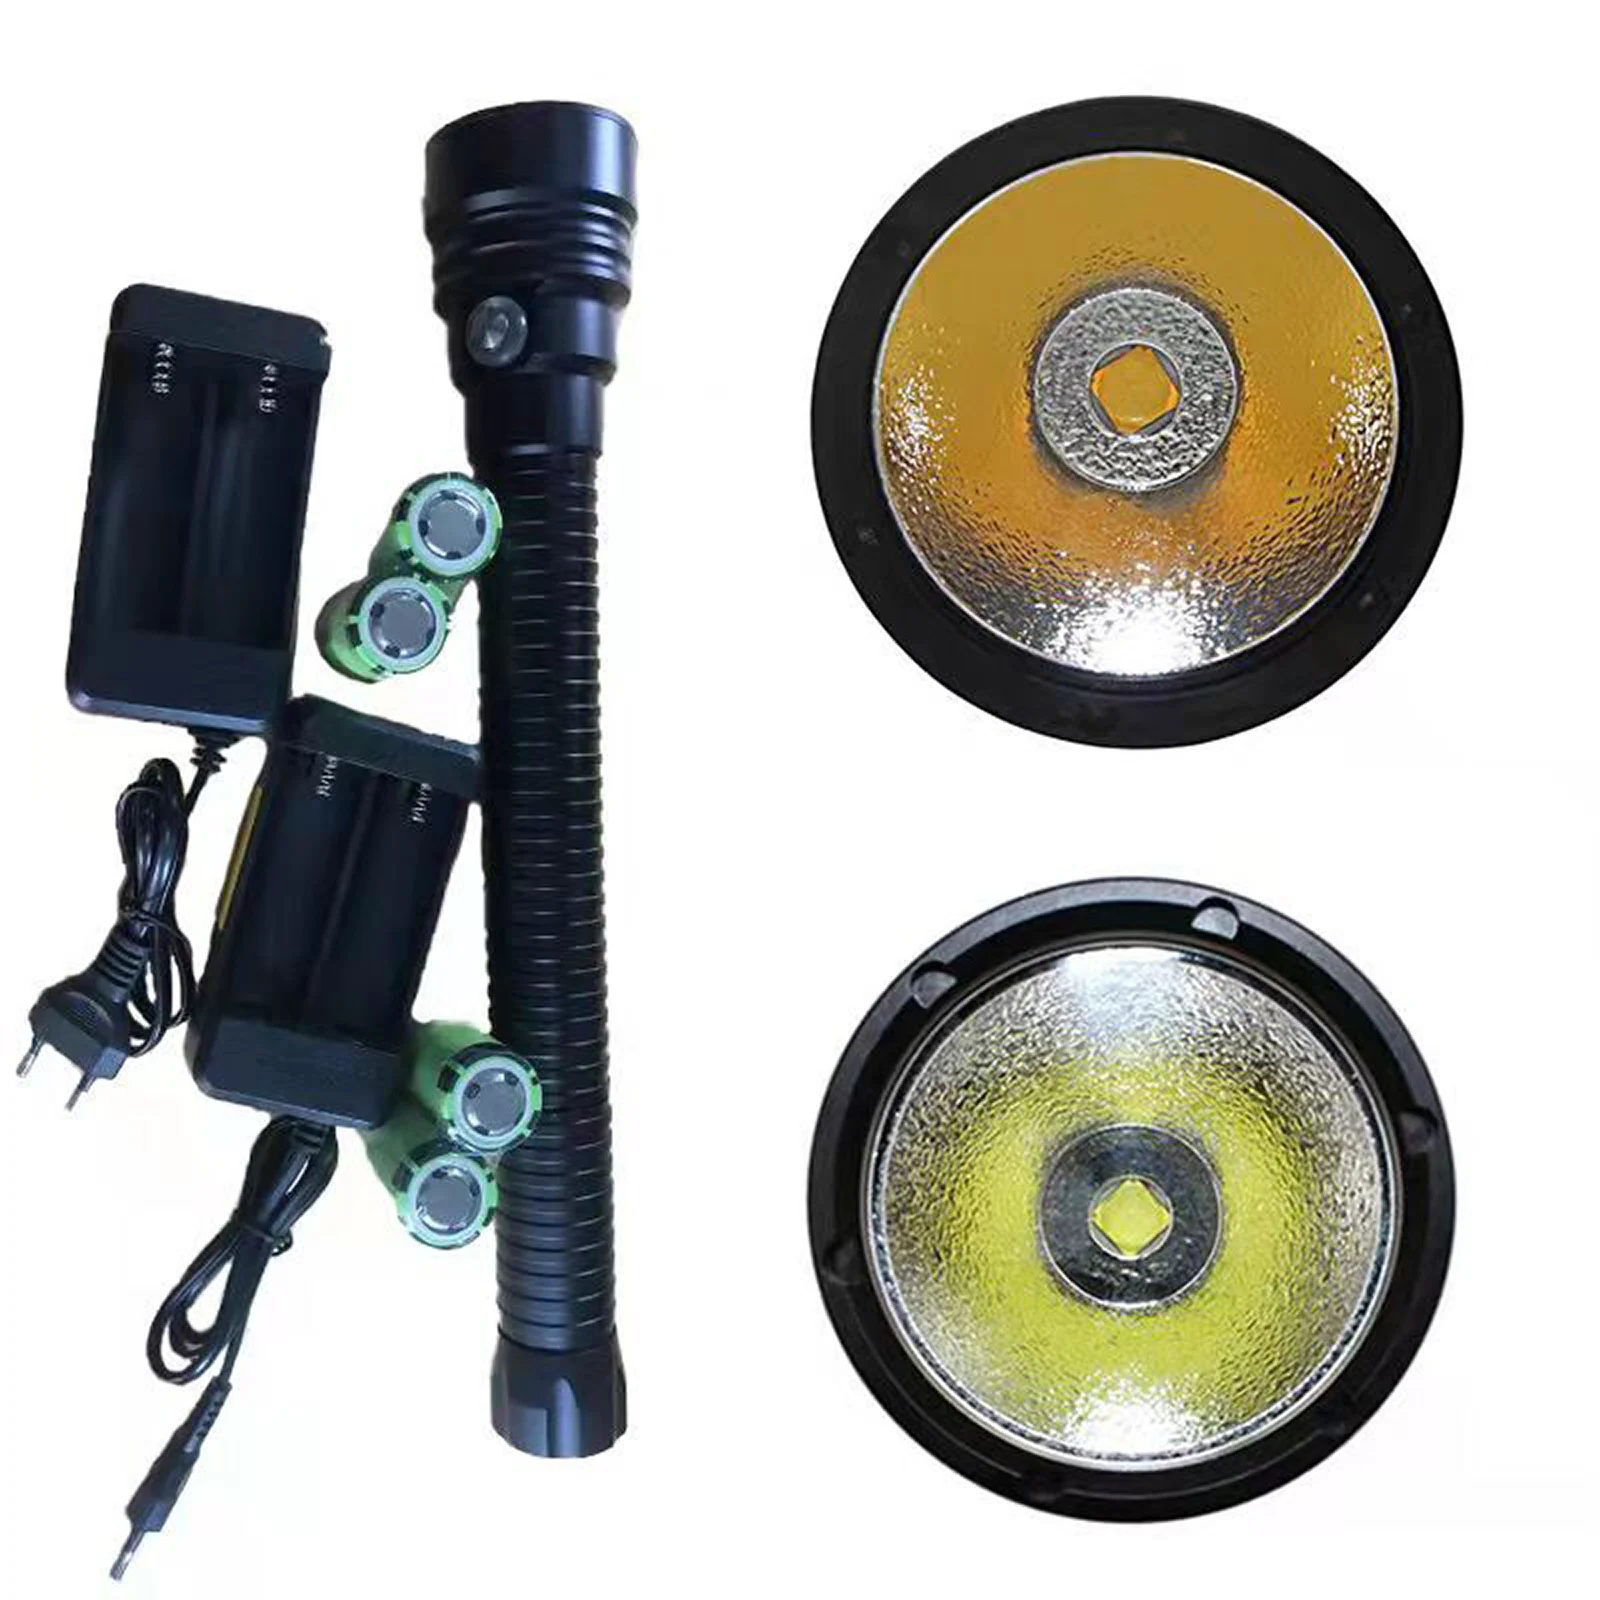 Powerful XHP70.2 led Yellow/White Light 4000 Lumens Diving Flashlight Torch 2/3/4/*26650 battery dive light led underwater xhp70 powkiddy q90 16gb open source game console 4000 games 3 0 hd ips screen linux system type c 1500mah battery built in speaker transparent white